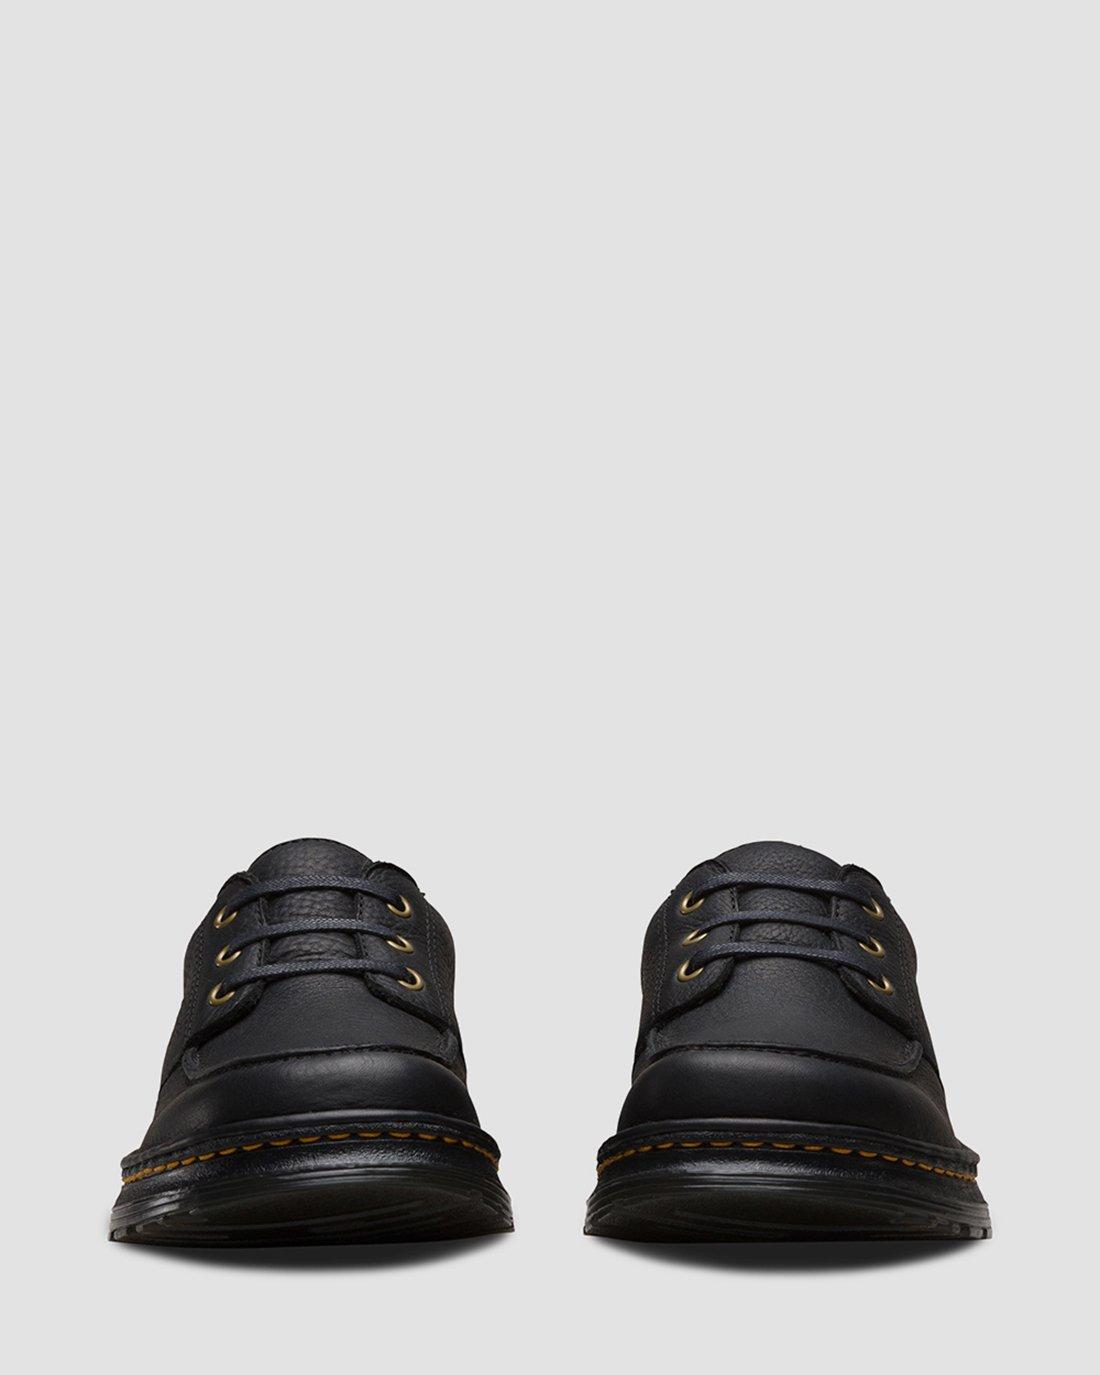 LUBBOCK GRIZZLY | Dr. Martens UK